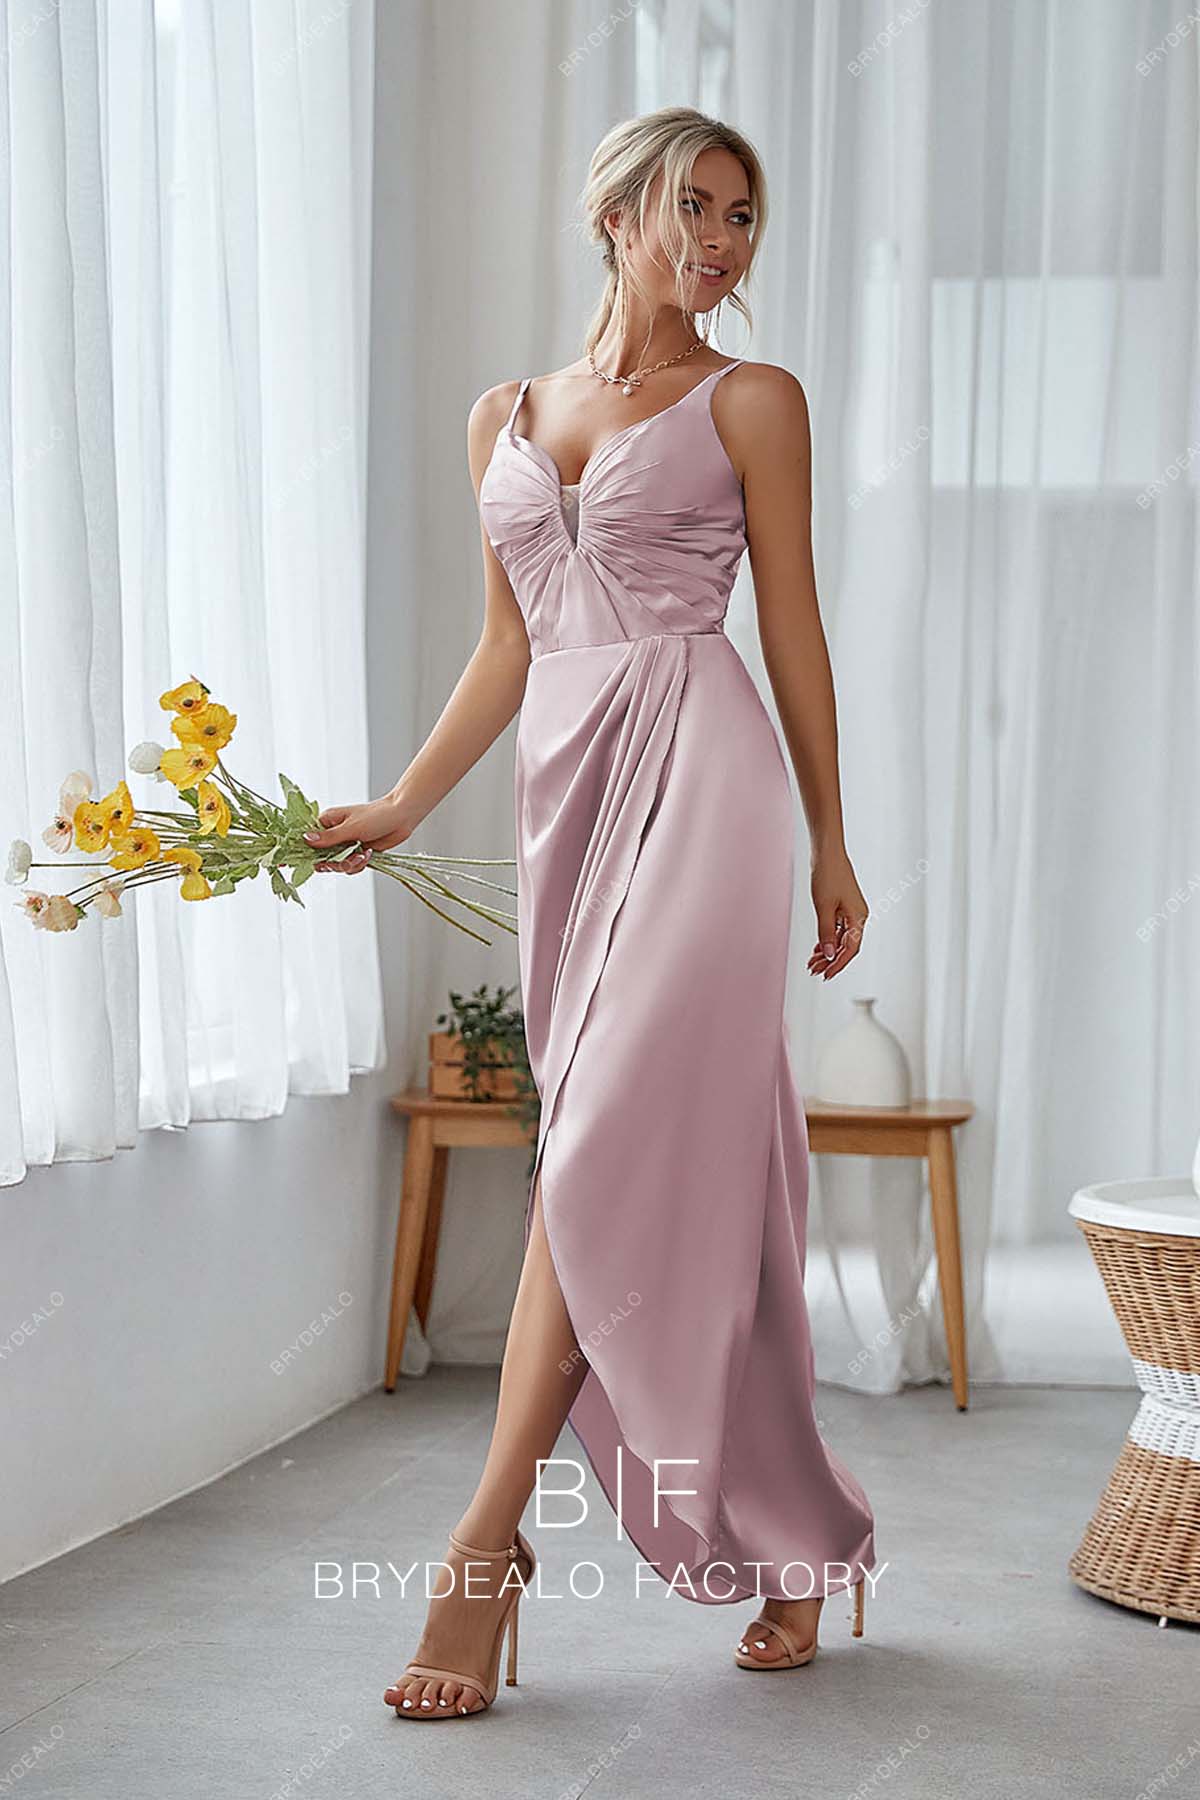 Wisteria Sleeveless Ruched Satin Ankle Length Wrap Dress